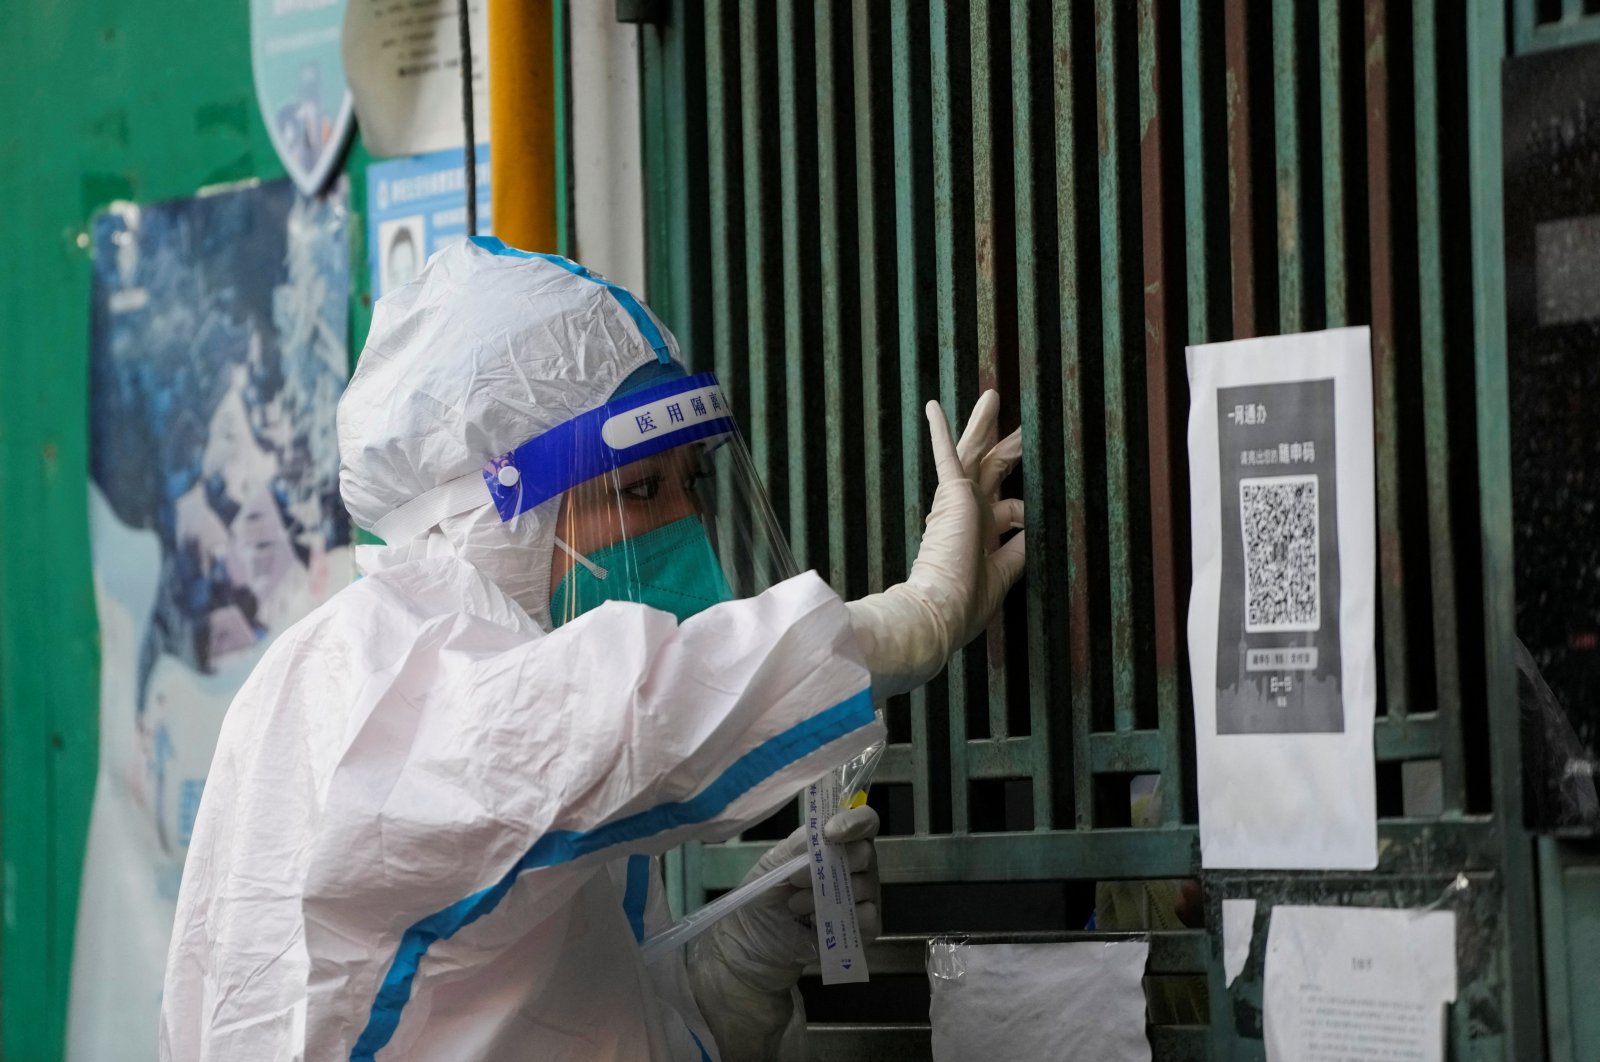 A medical worker in a protective suit collects a swab sample from a resident for nucleic acid testing, outside a closed entrance of a building during a lockdown, amid the coronavirus pandemic, in Shanghai, China, May 5, 2022. (Reuters Photo)